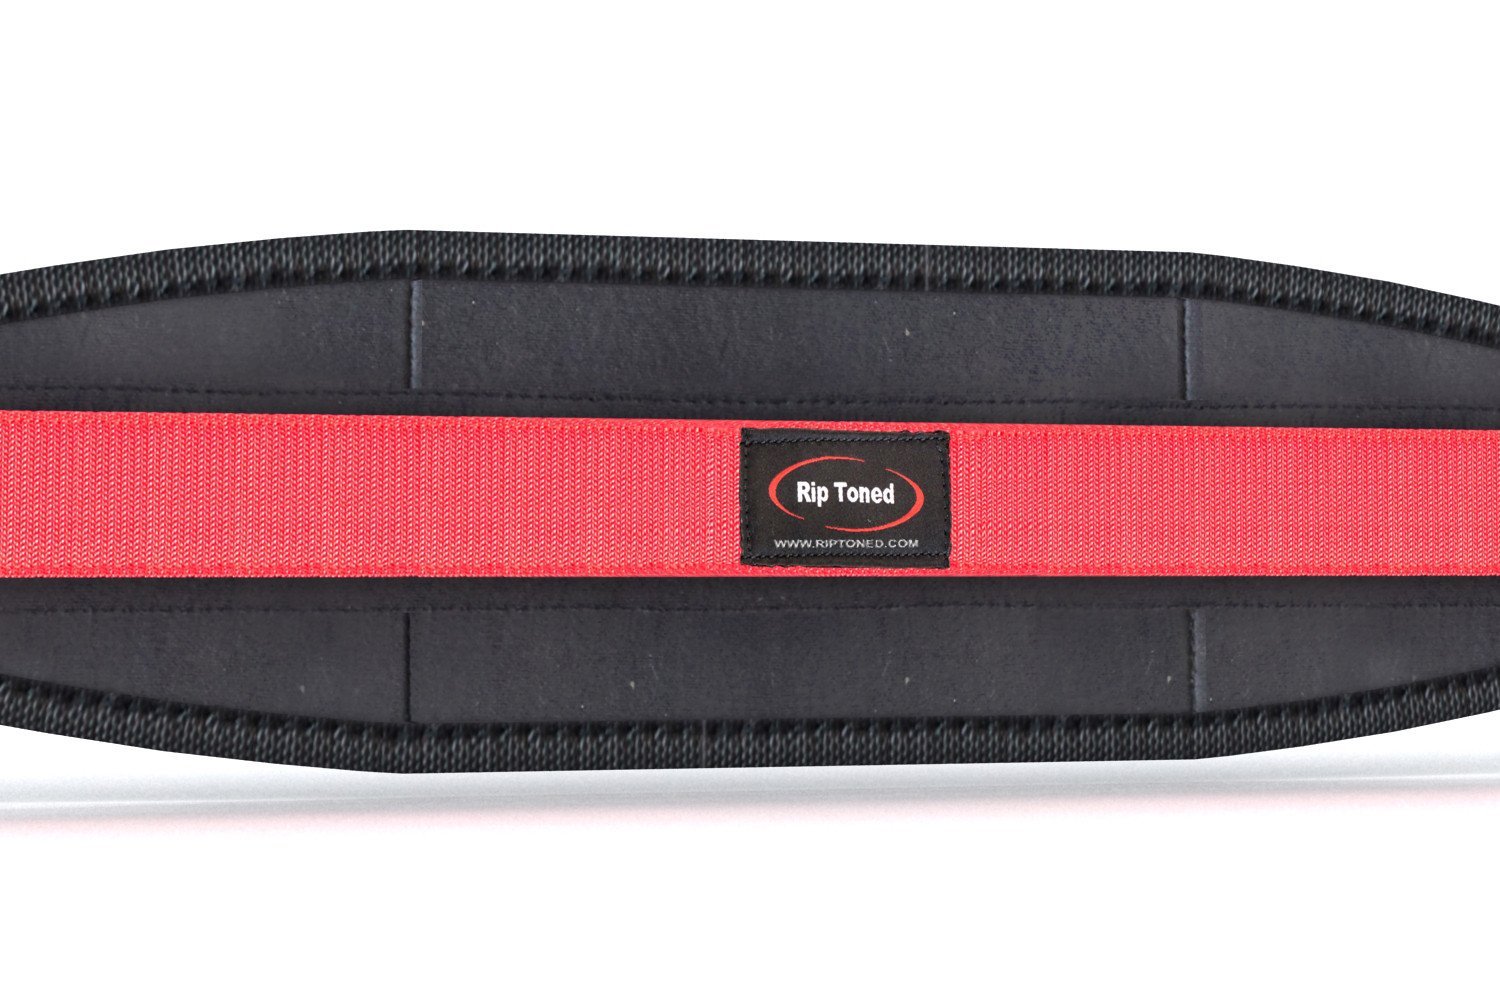 4.5" Weightlifting Belt - Rip Toned